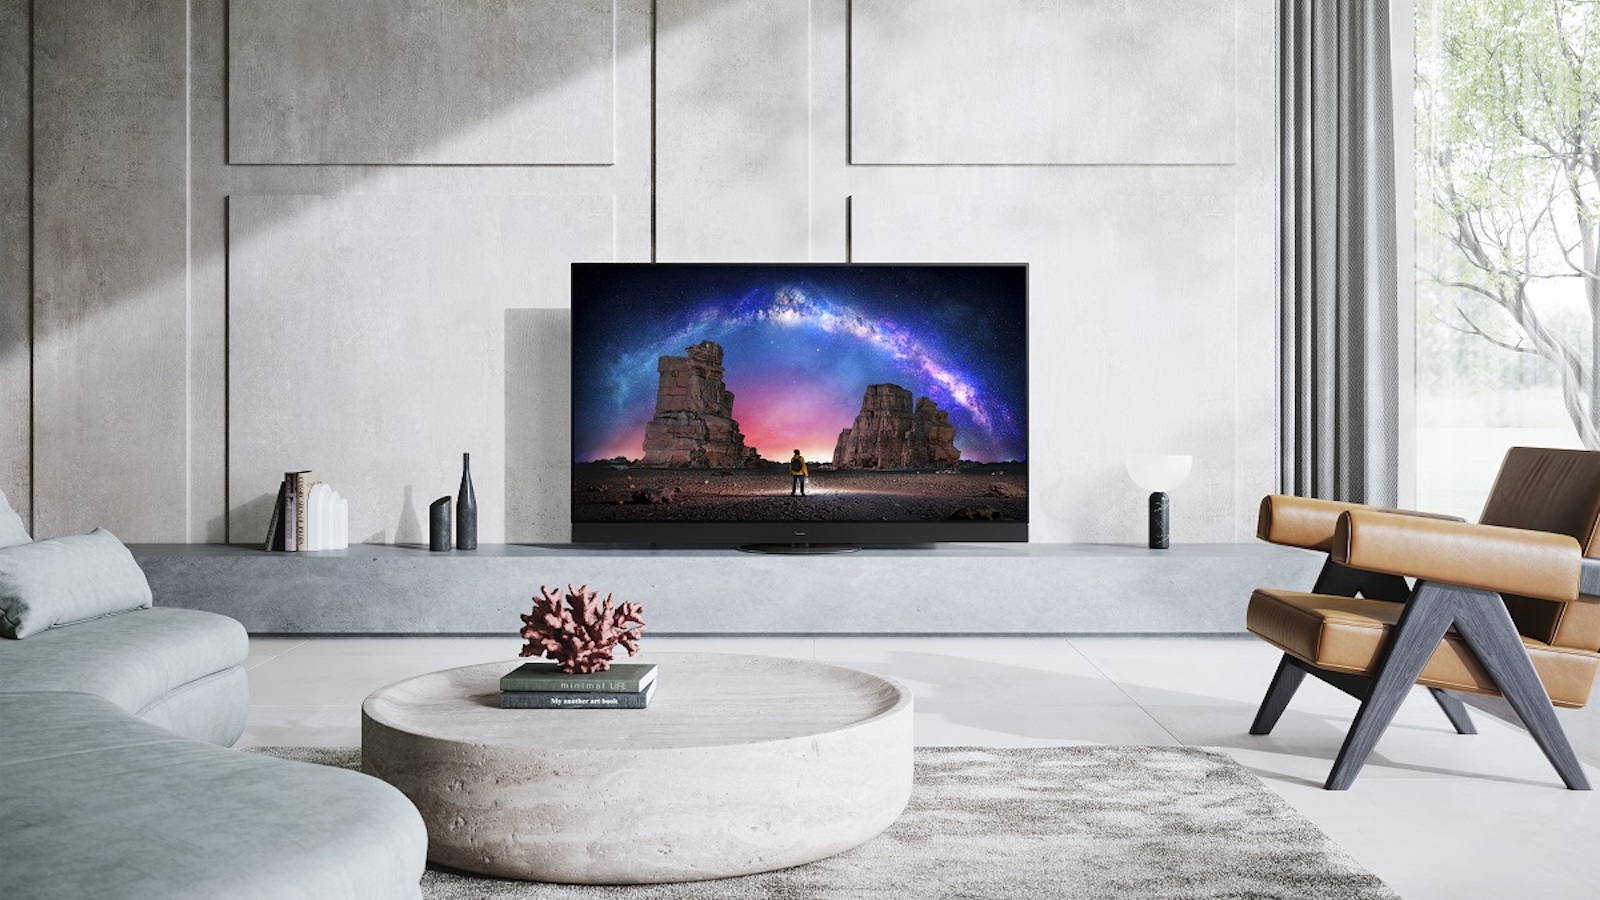 Panasonic's flagship OLED TV for 2021 is the JZ2000 | What Hi-Fi?